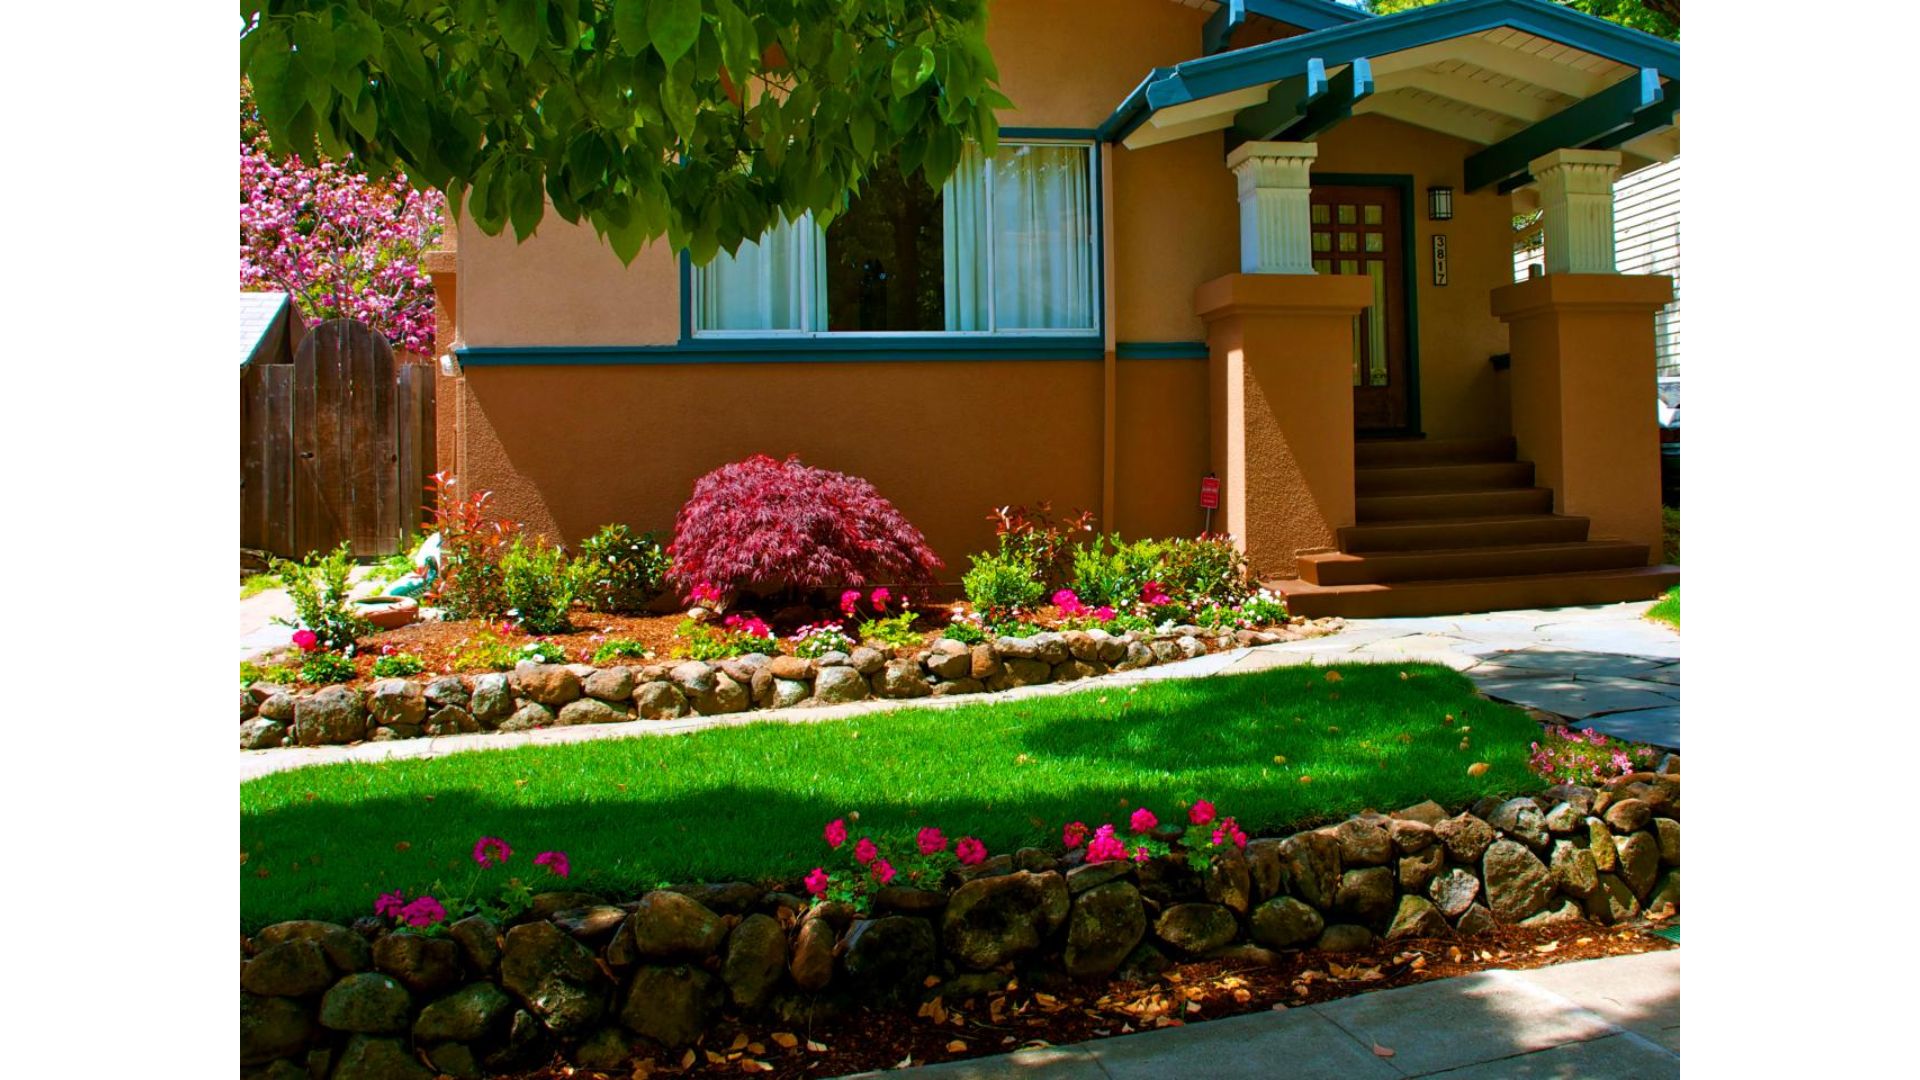 Use landscape design to “soften” your home.